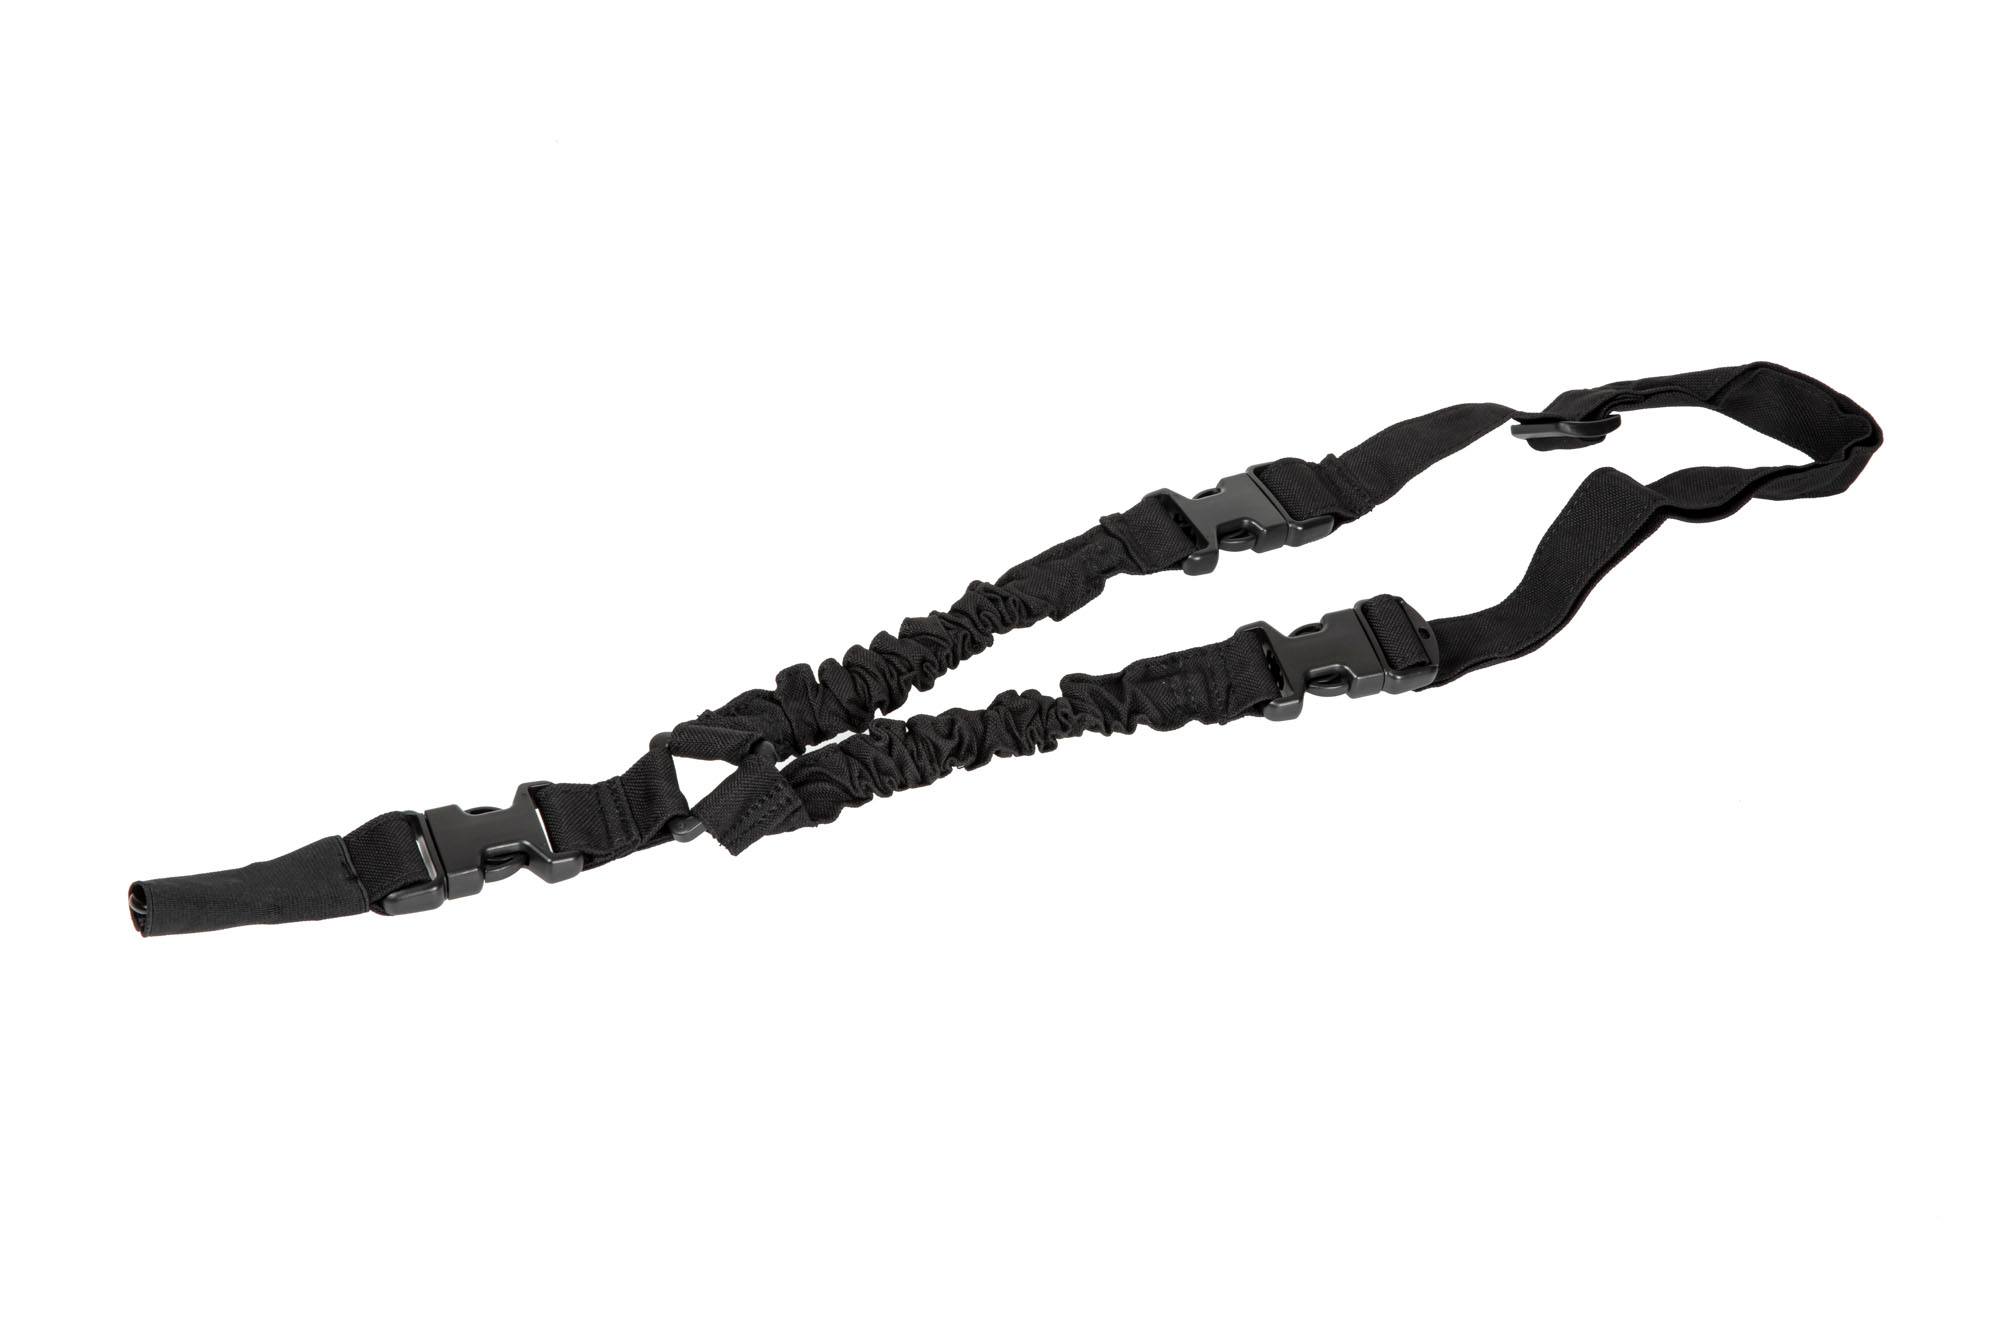 One-Point Specna Arms III Tactical Sling – Black